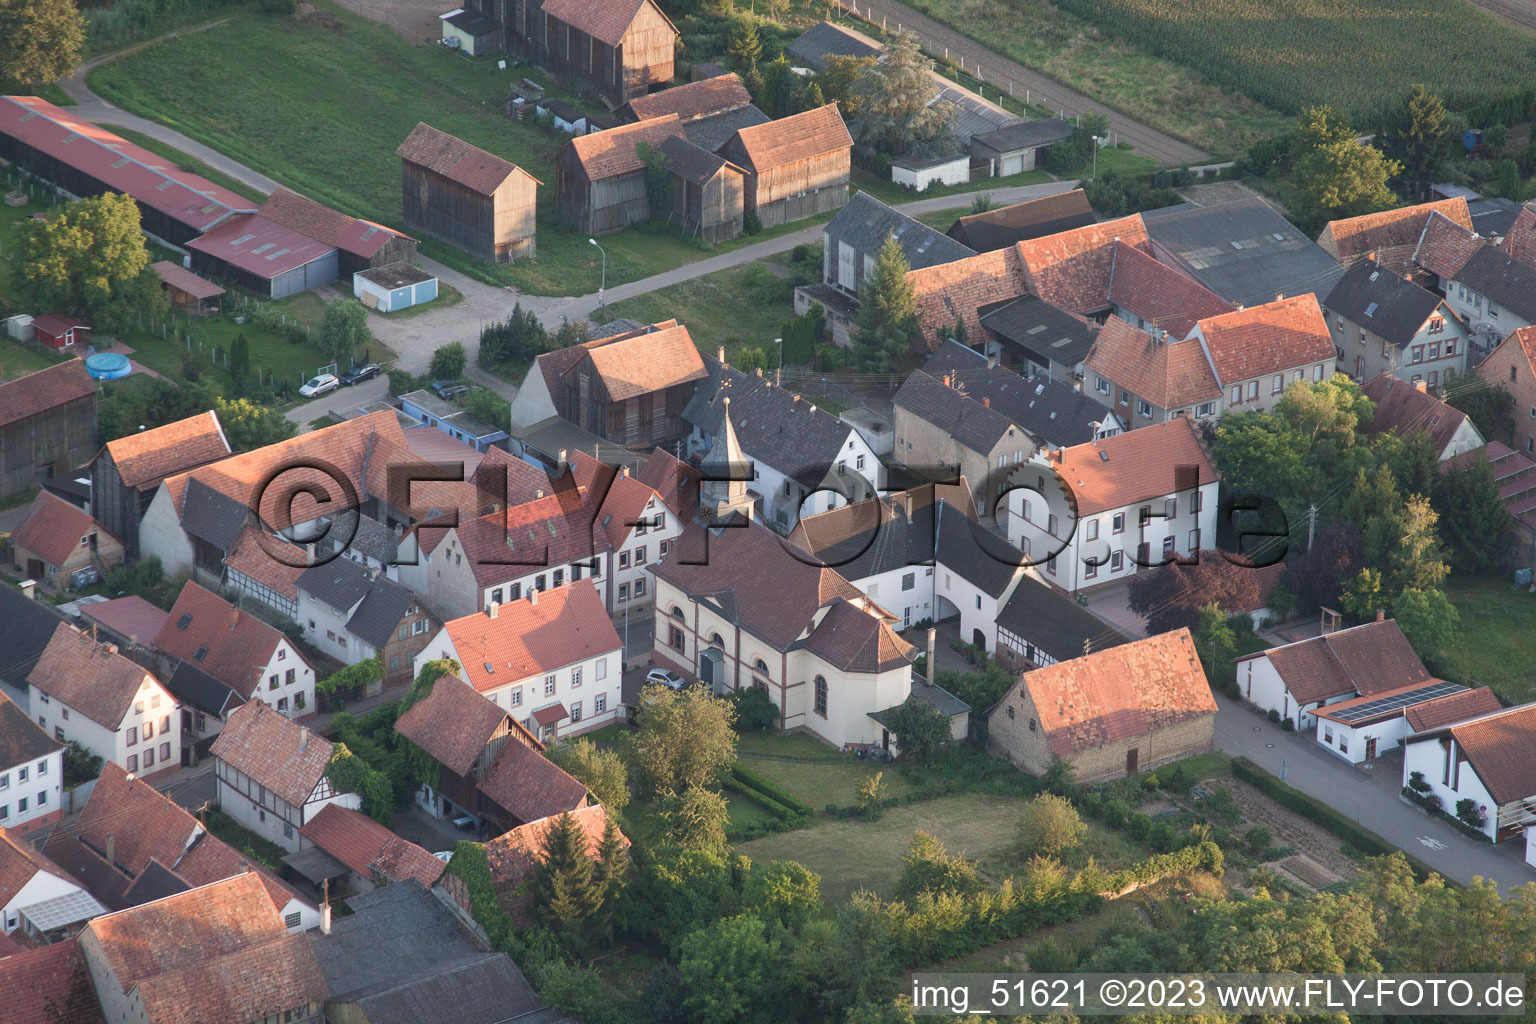 Herxheimweyher in the state Rhineland-Palatinate, Germany from the drone perspective